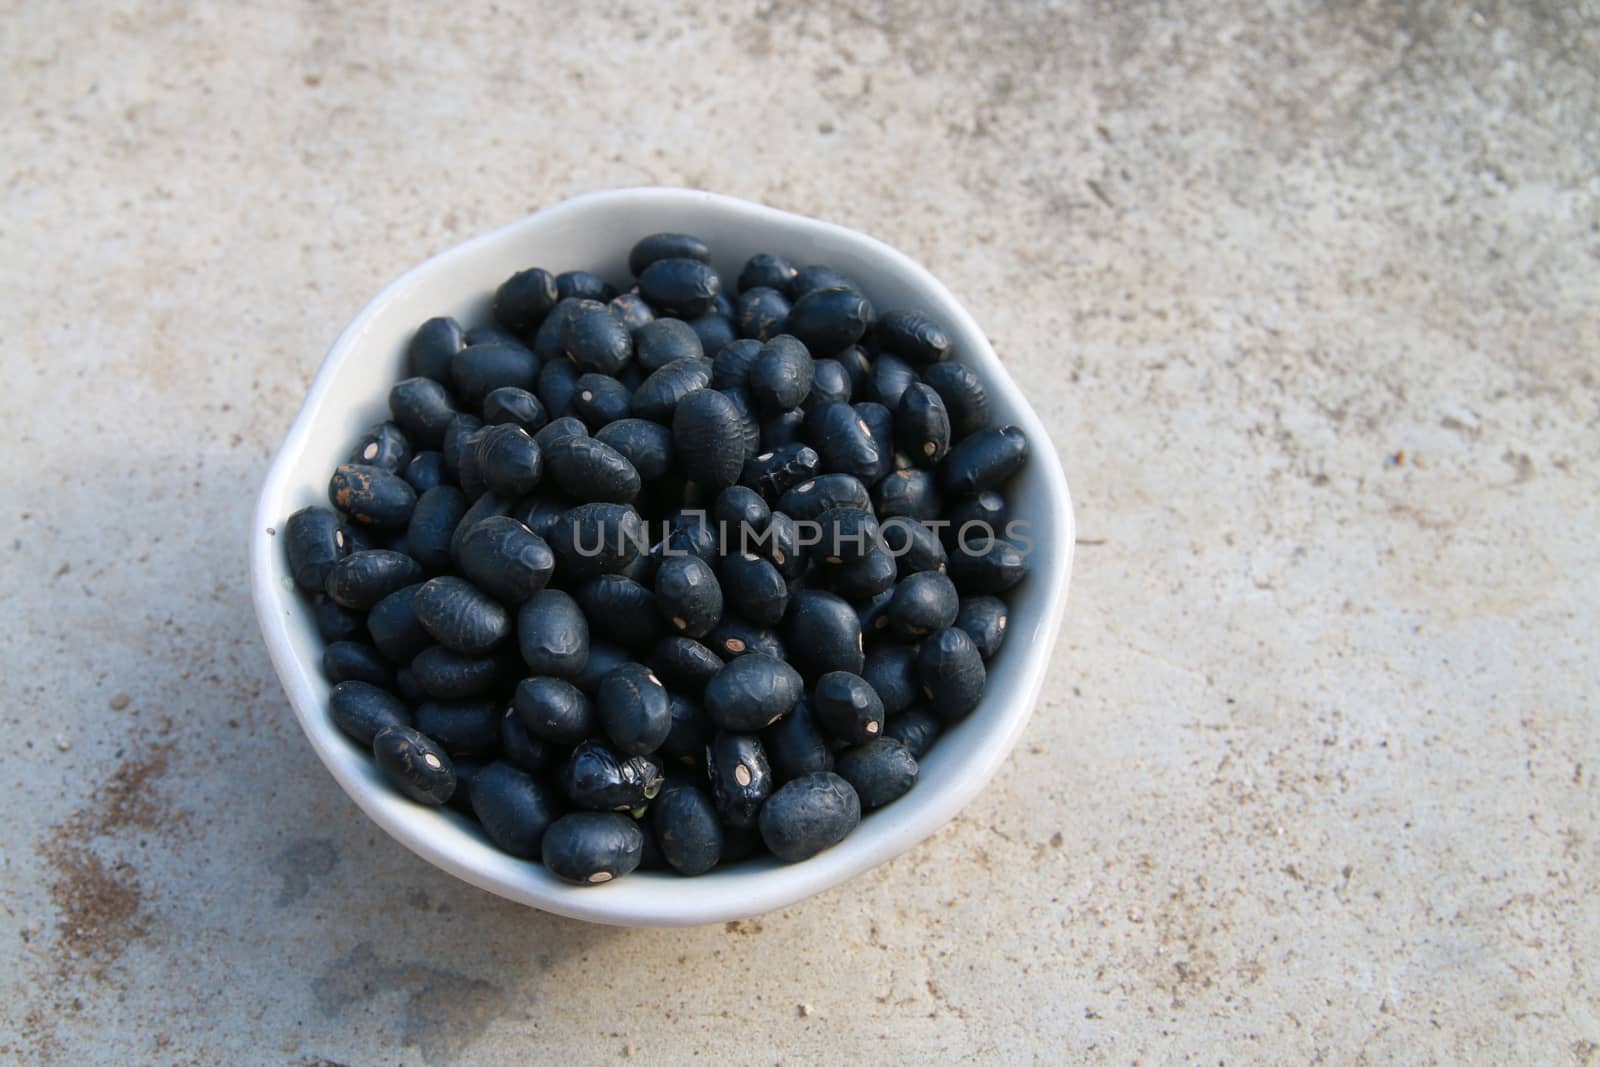 The cup of balck bean.Usually use for making beverage.